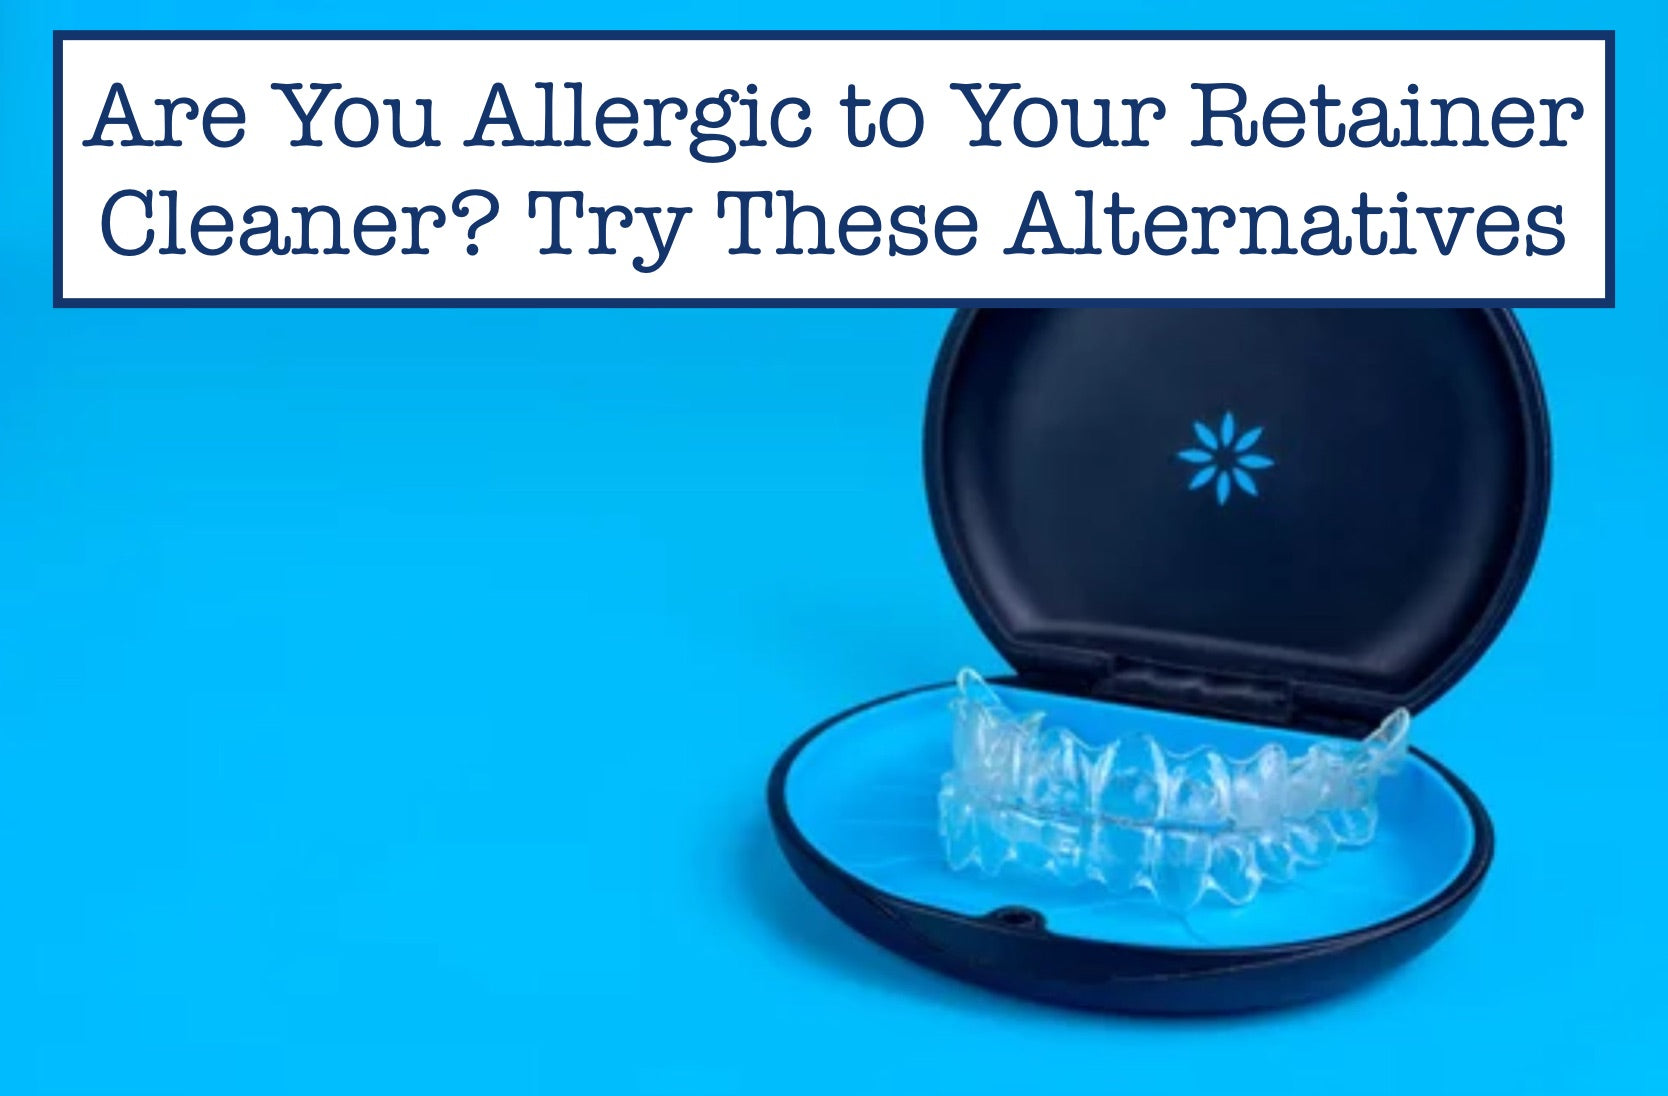 Are You Allergic to Your Retainer Cleaner? Try These Alternatives